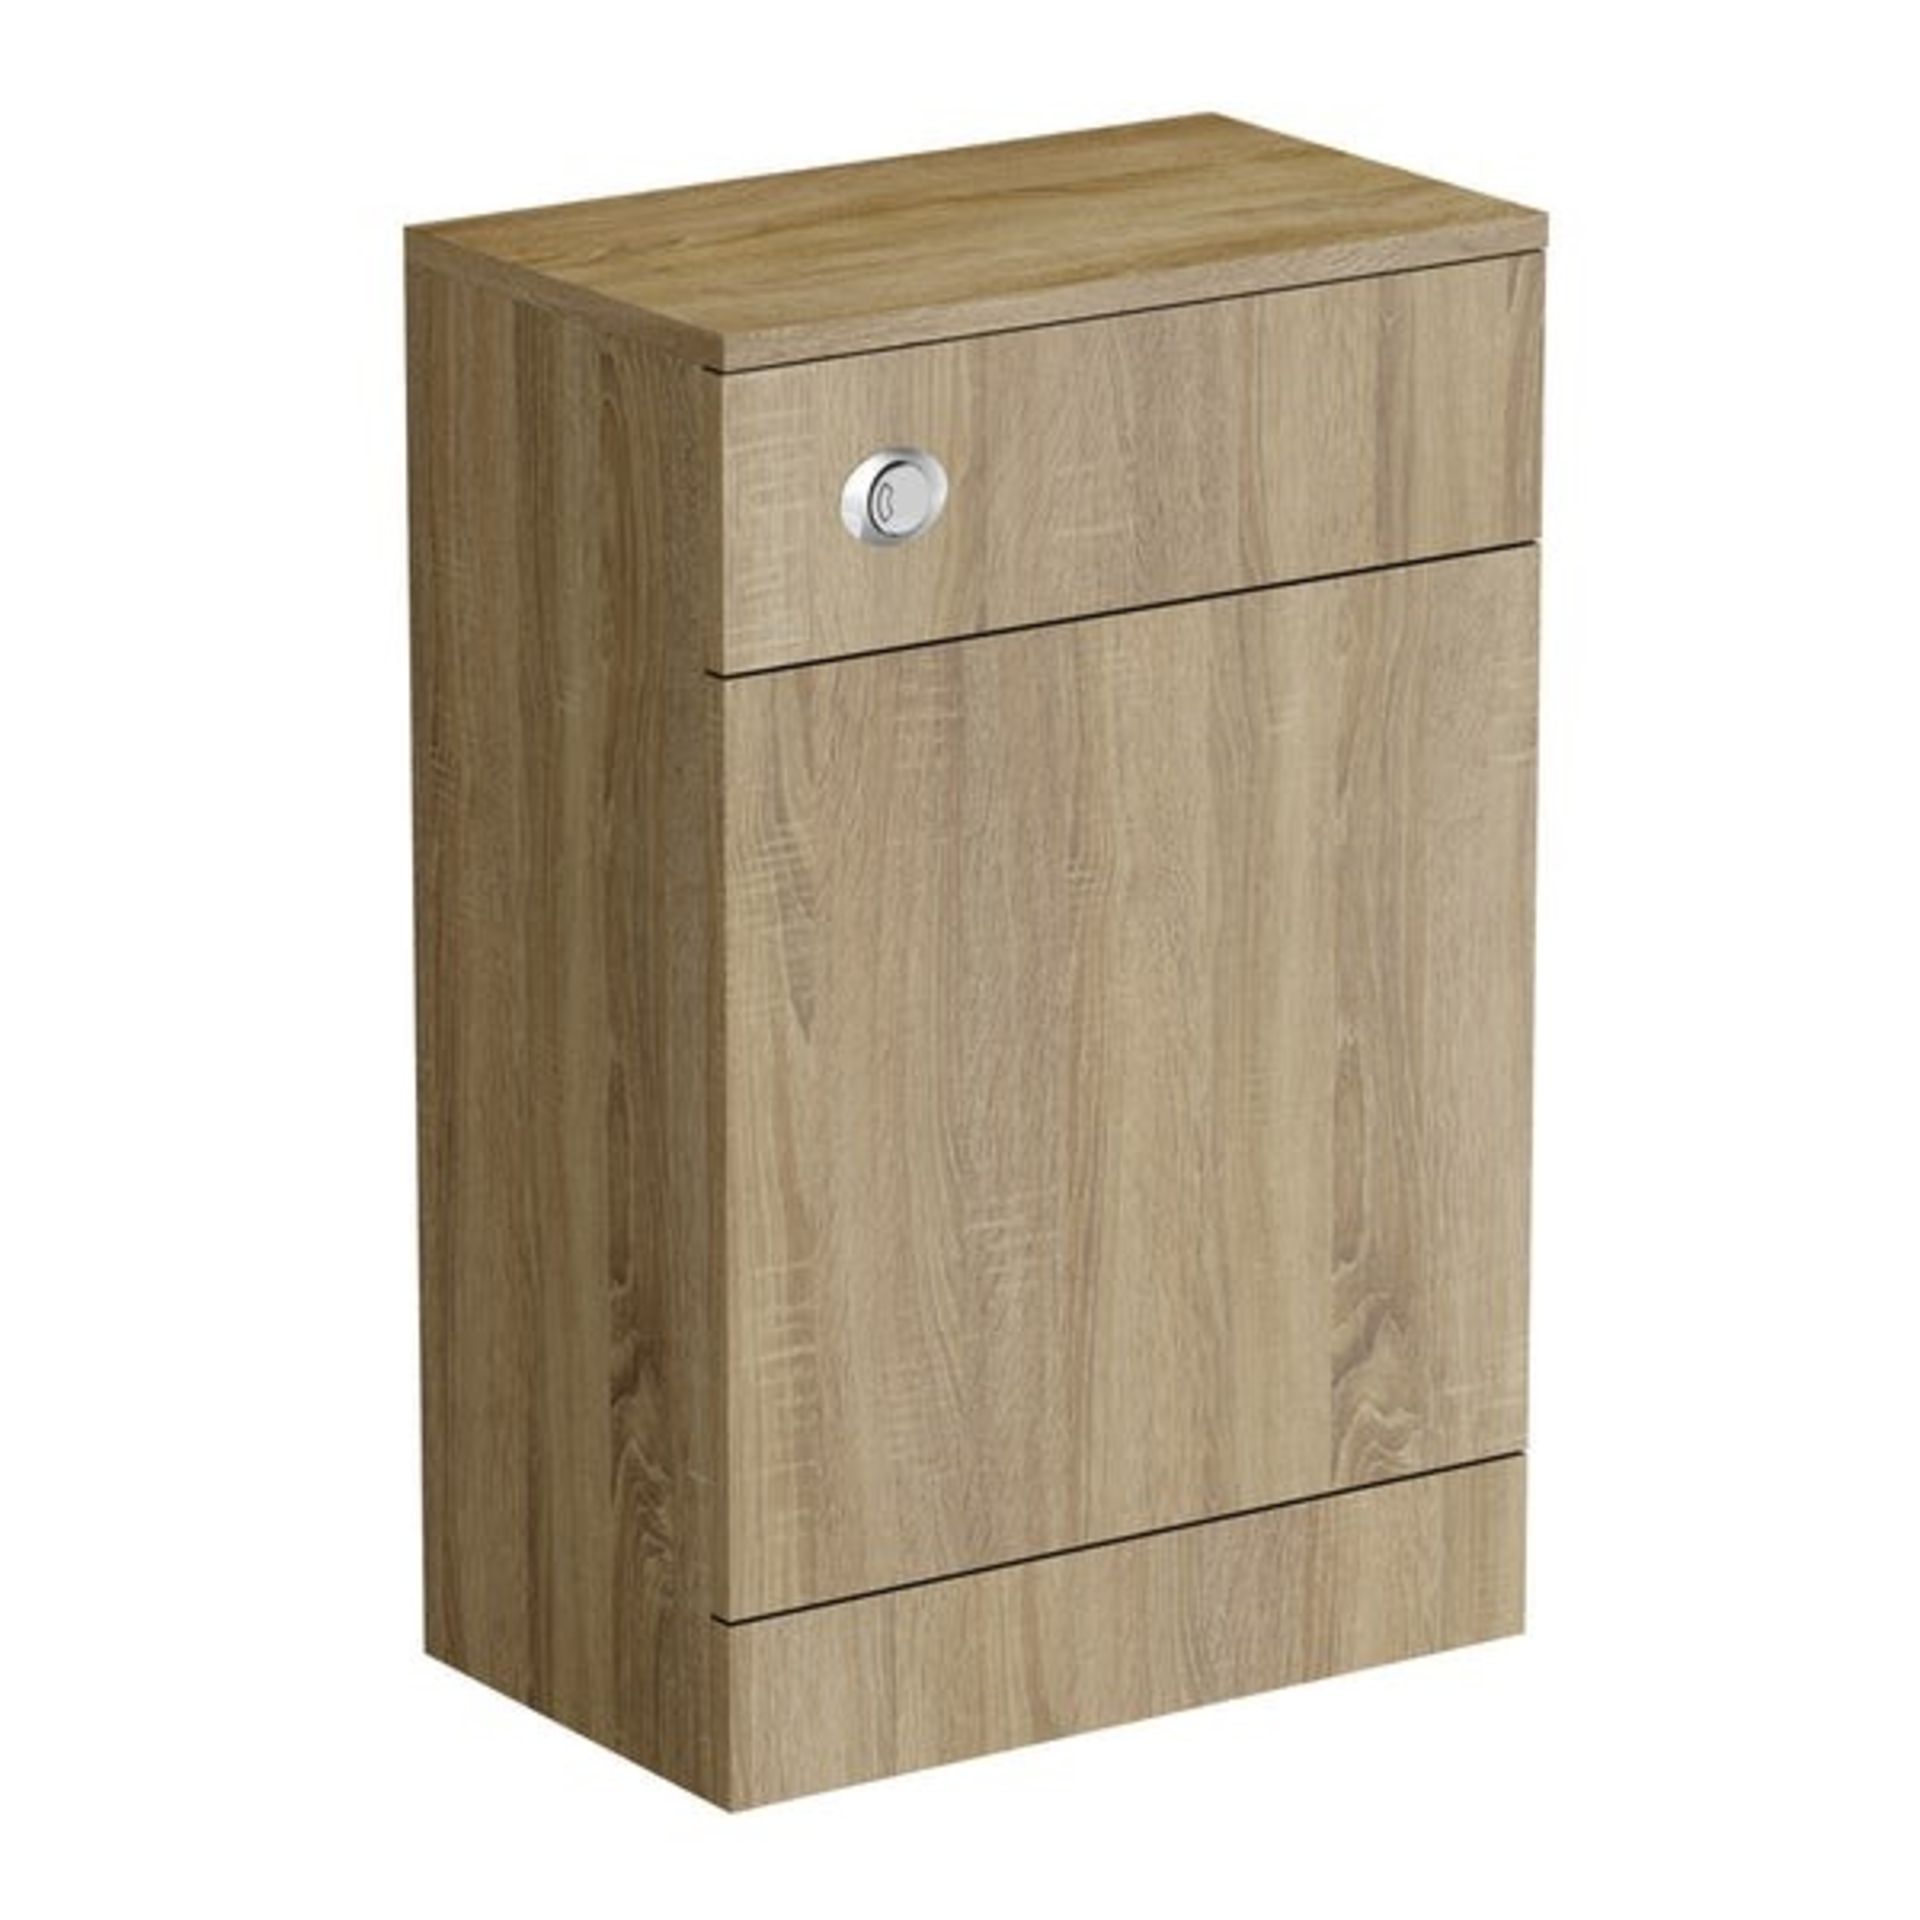 1 BOXED SIENNA OAK 330MM BACK TO THE WALL UNIT - MODBTW3001 / RRP £350.00 (VIEWING HIGHLY